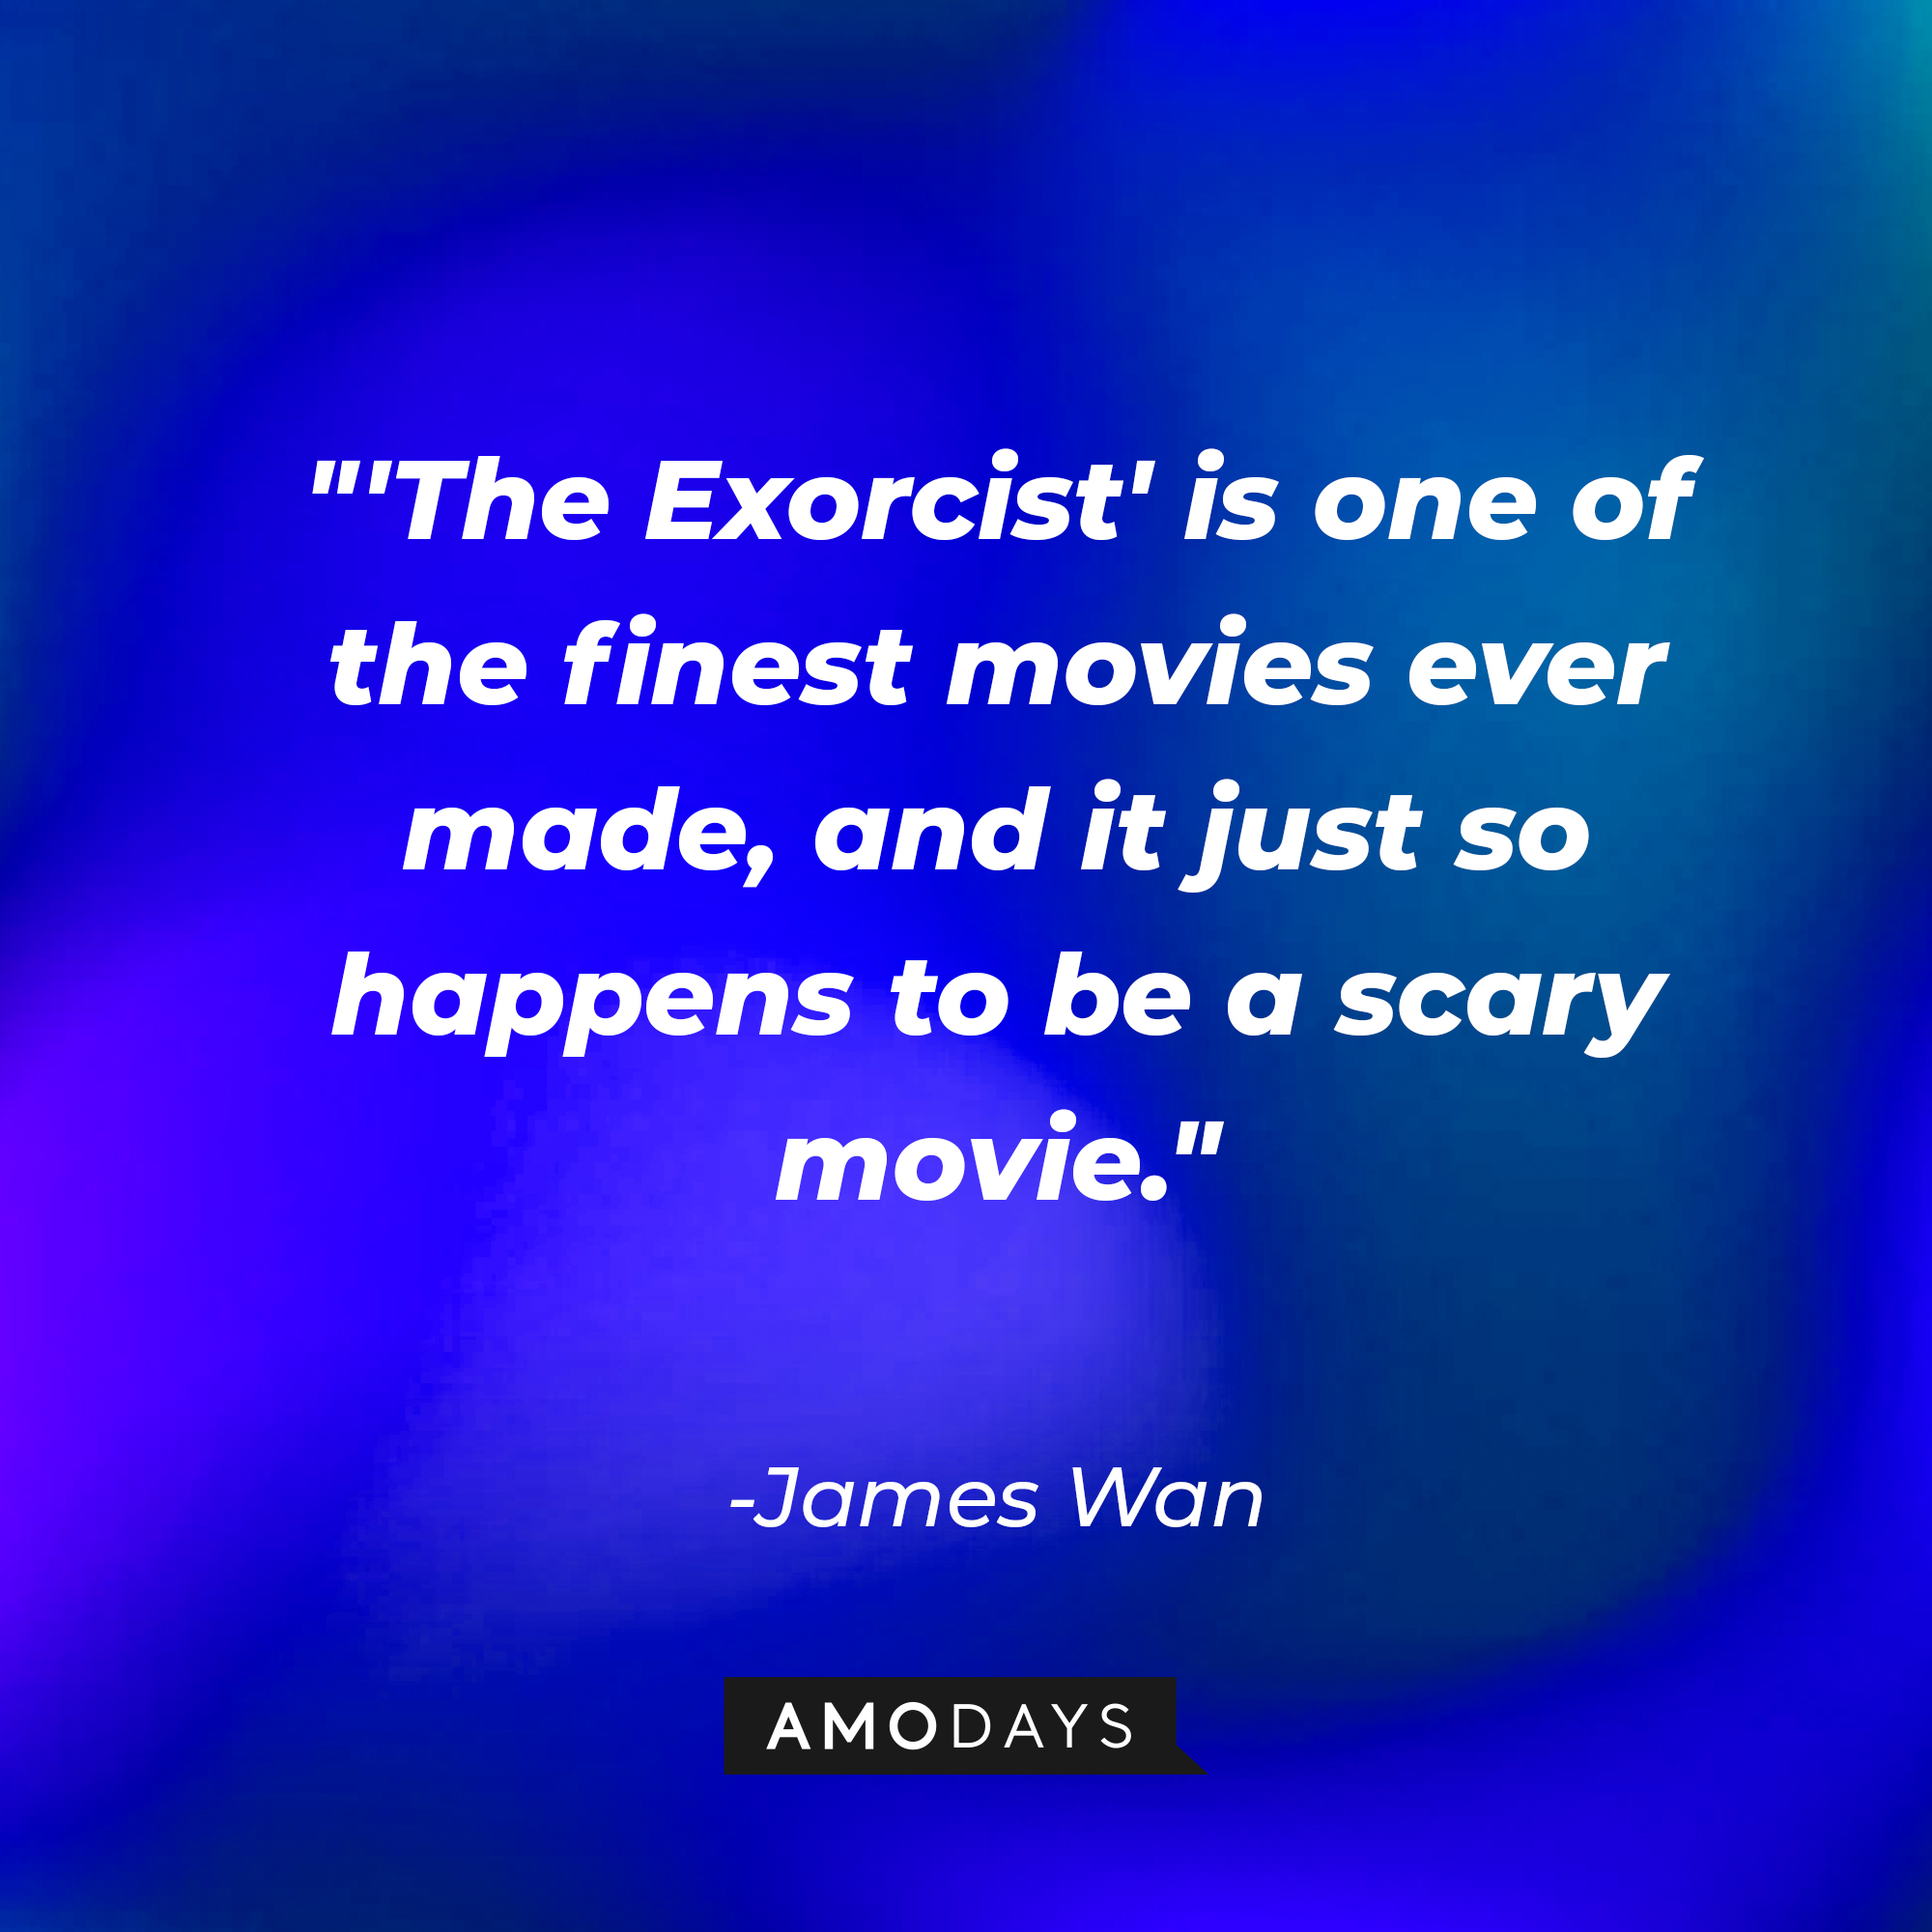 James Wan's quote: "'The Exorcist' is one of the finest movies ever made, and it just so happens to be a scary movie." | Source: AmoDAys